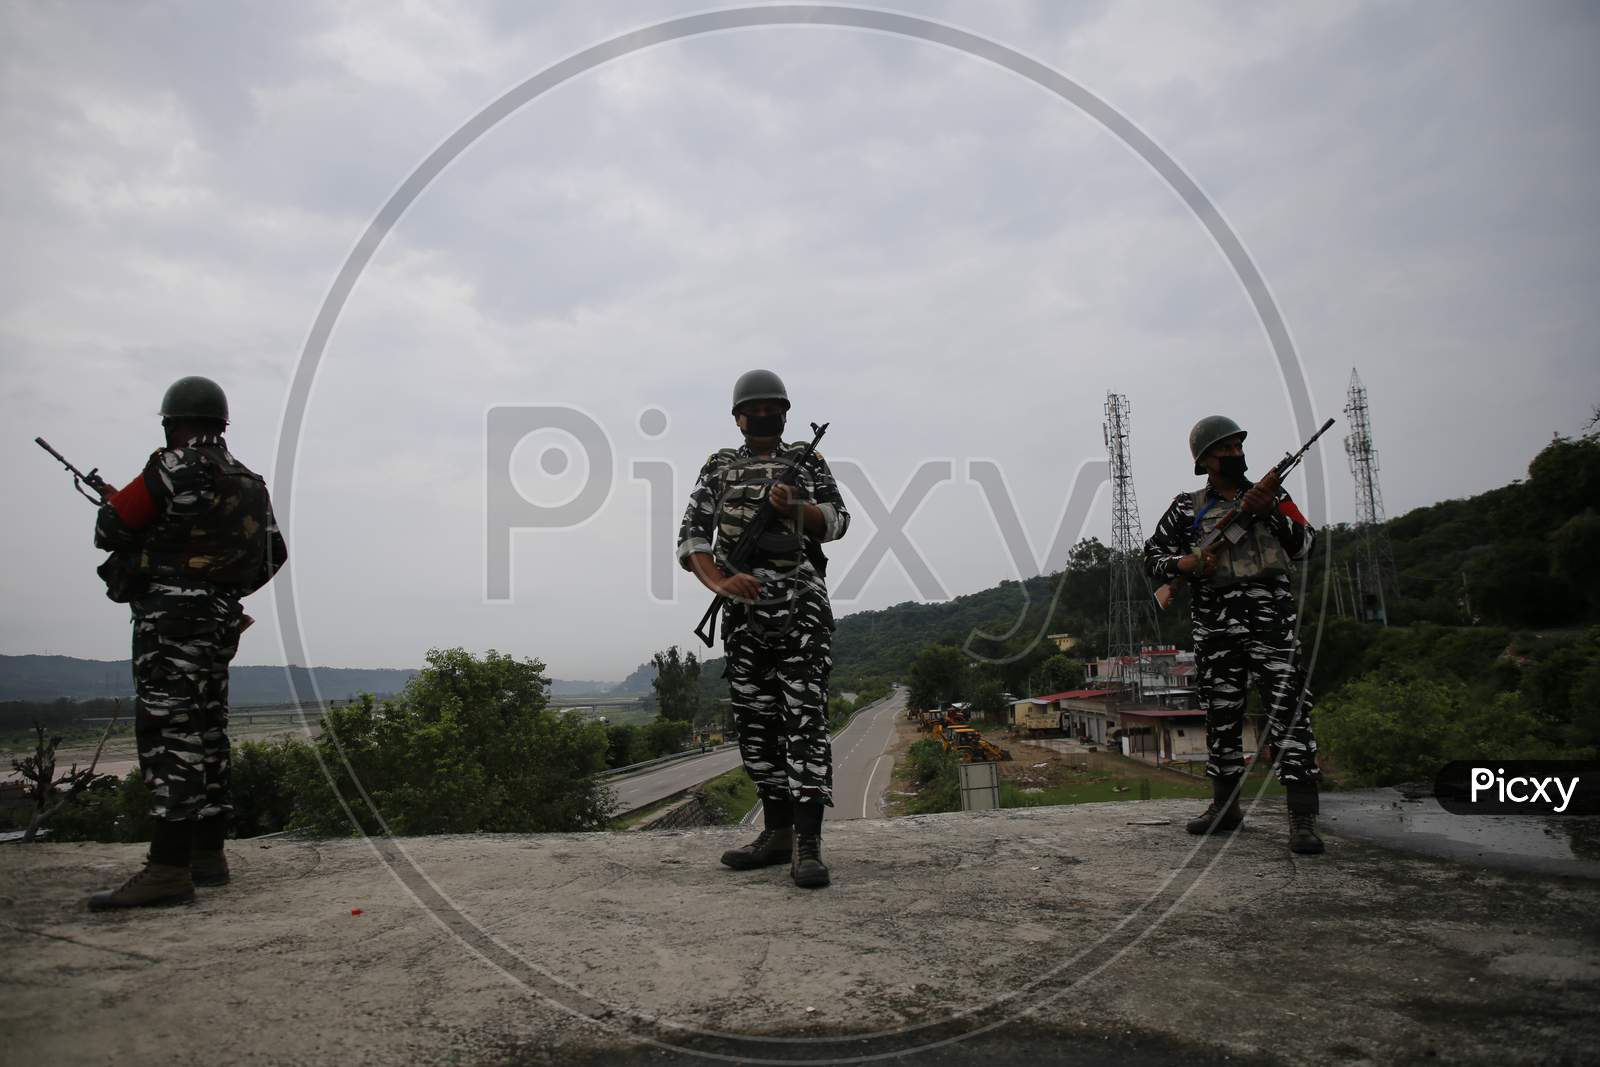 CRPF personnel stand guard along the Jammu-Srinagar highway near Jammu, ahead of the 74th Independence day celebrations  in Jammu on August 14, 2020.